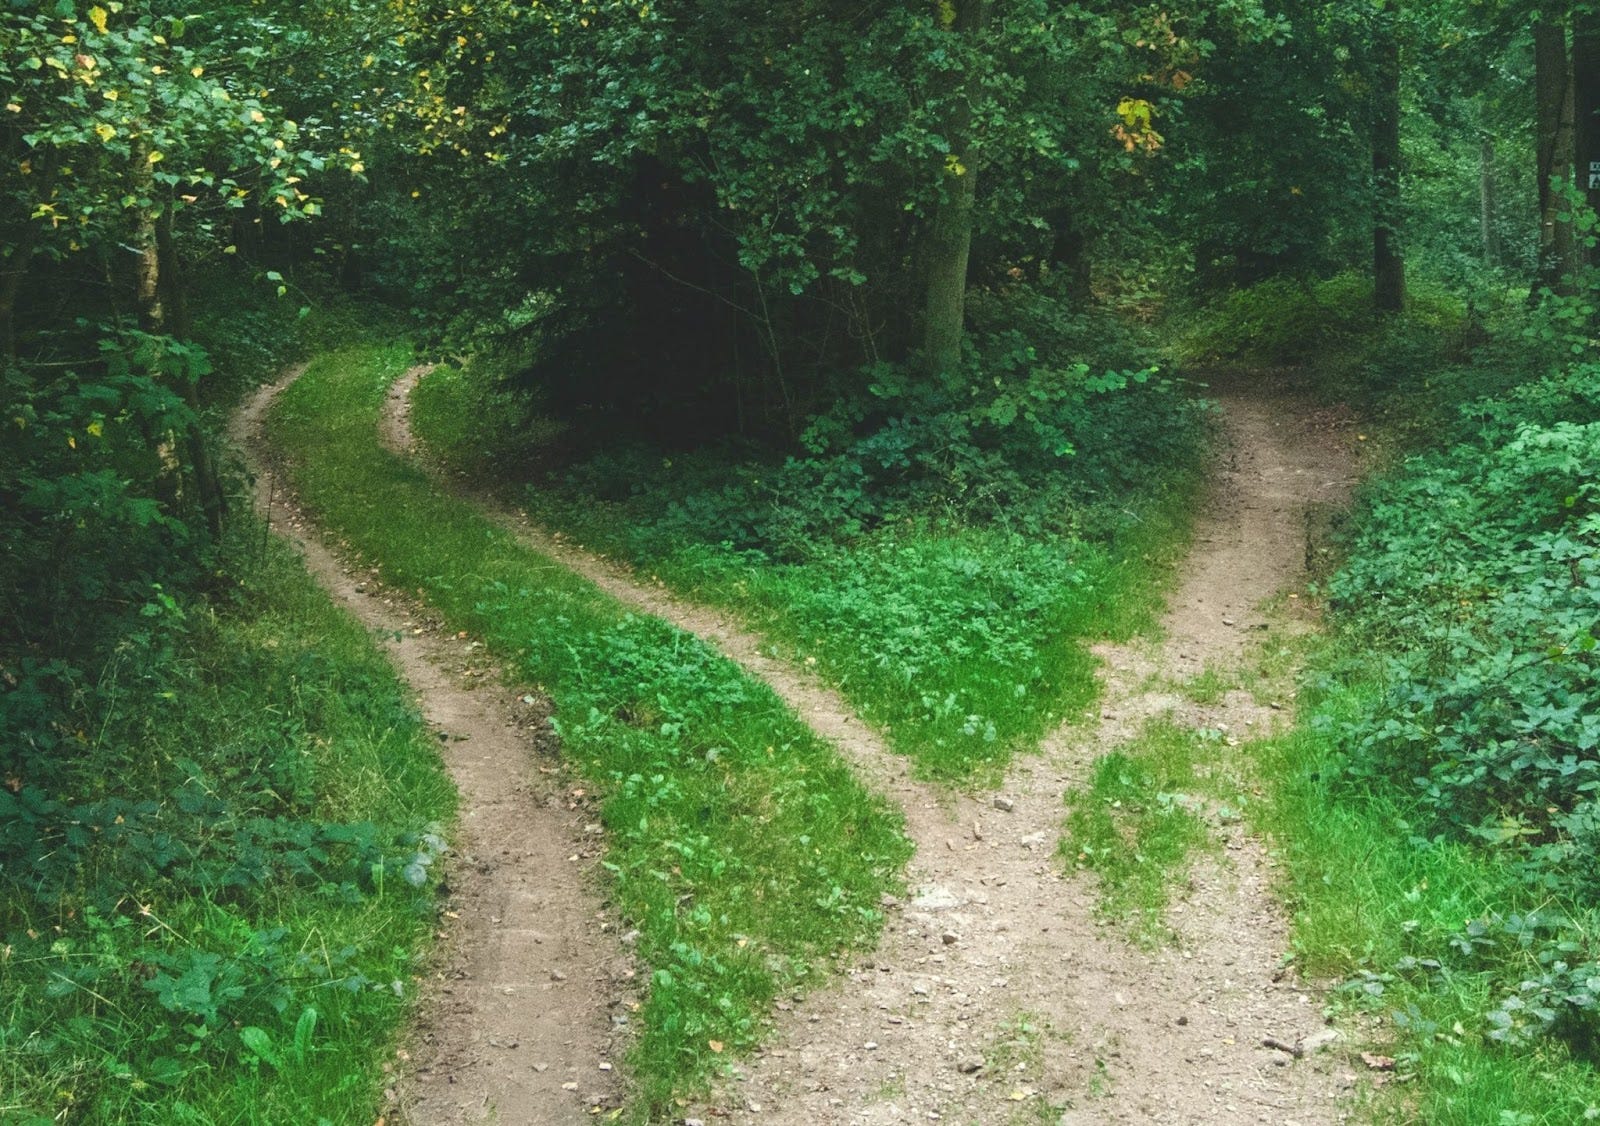 Photo of a forked dirt road progressing from one to two paths, surrounded by trees and greenery.